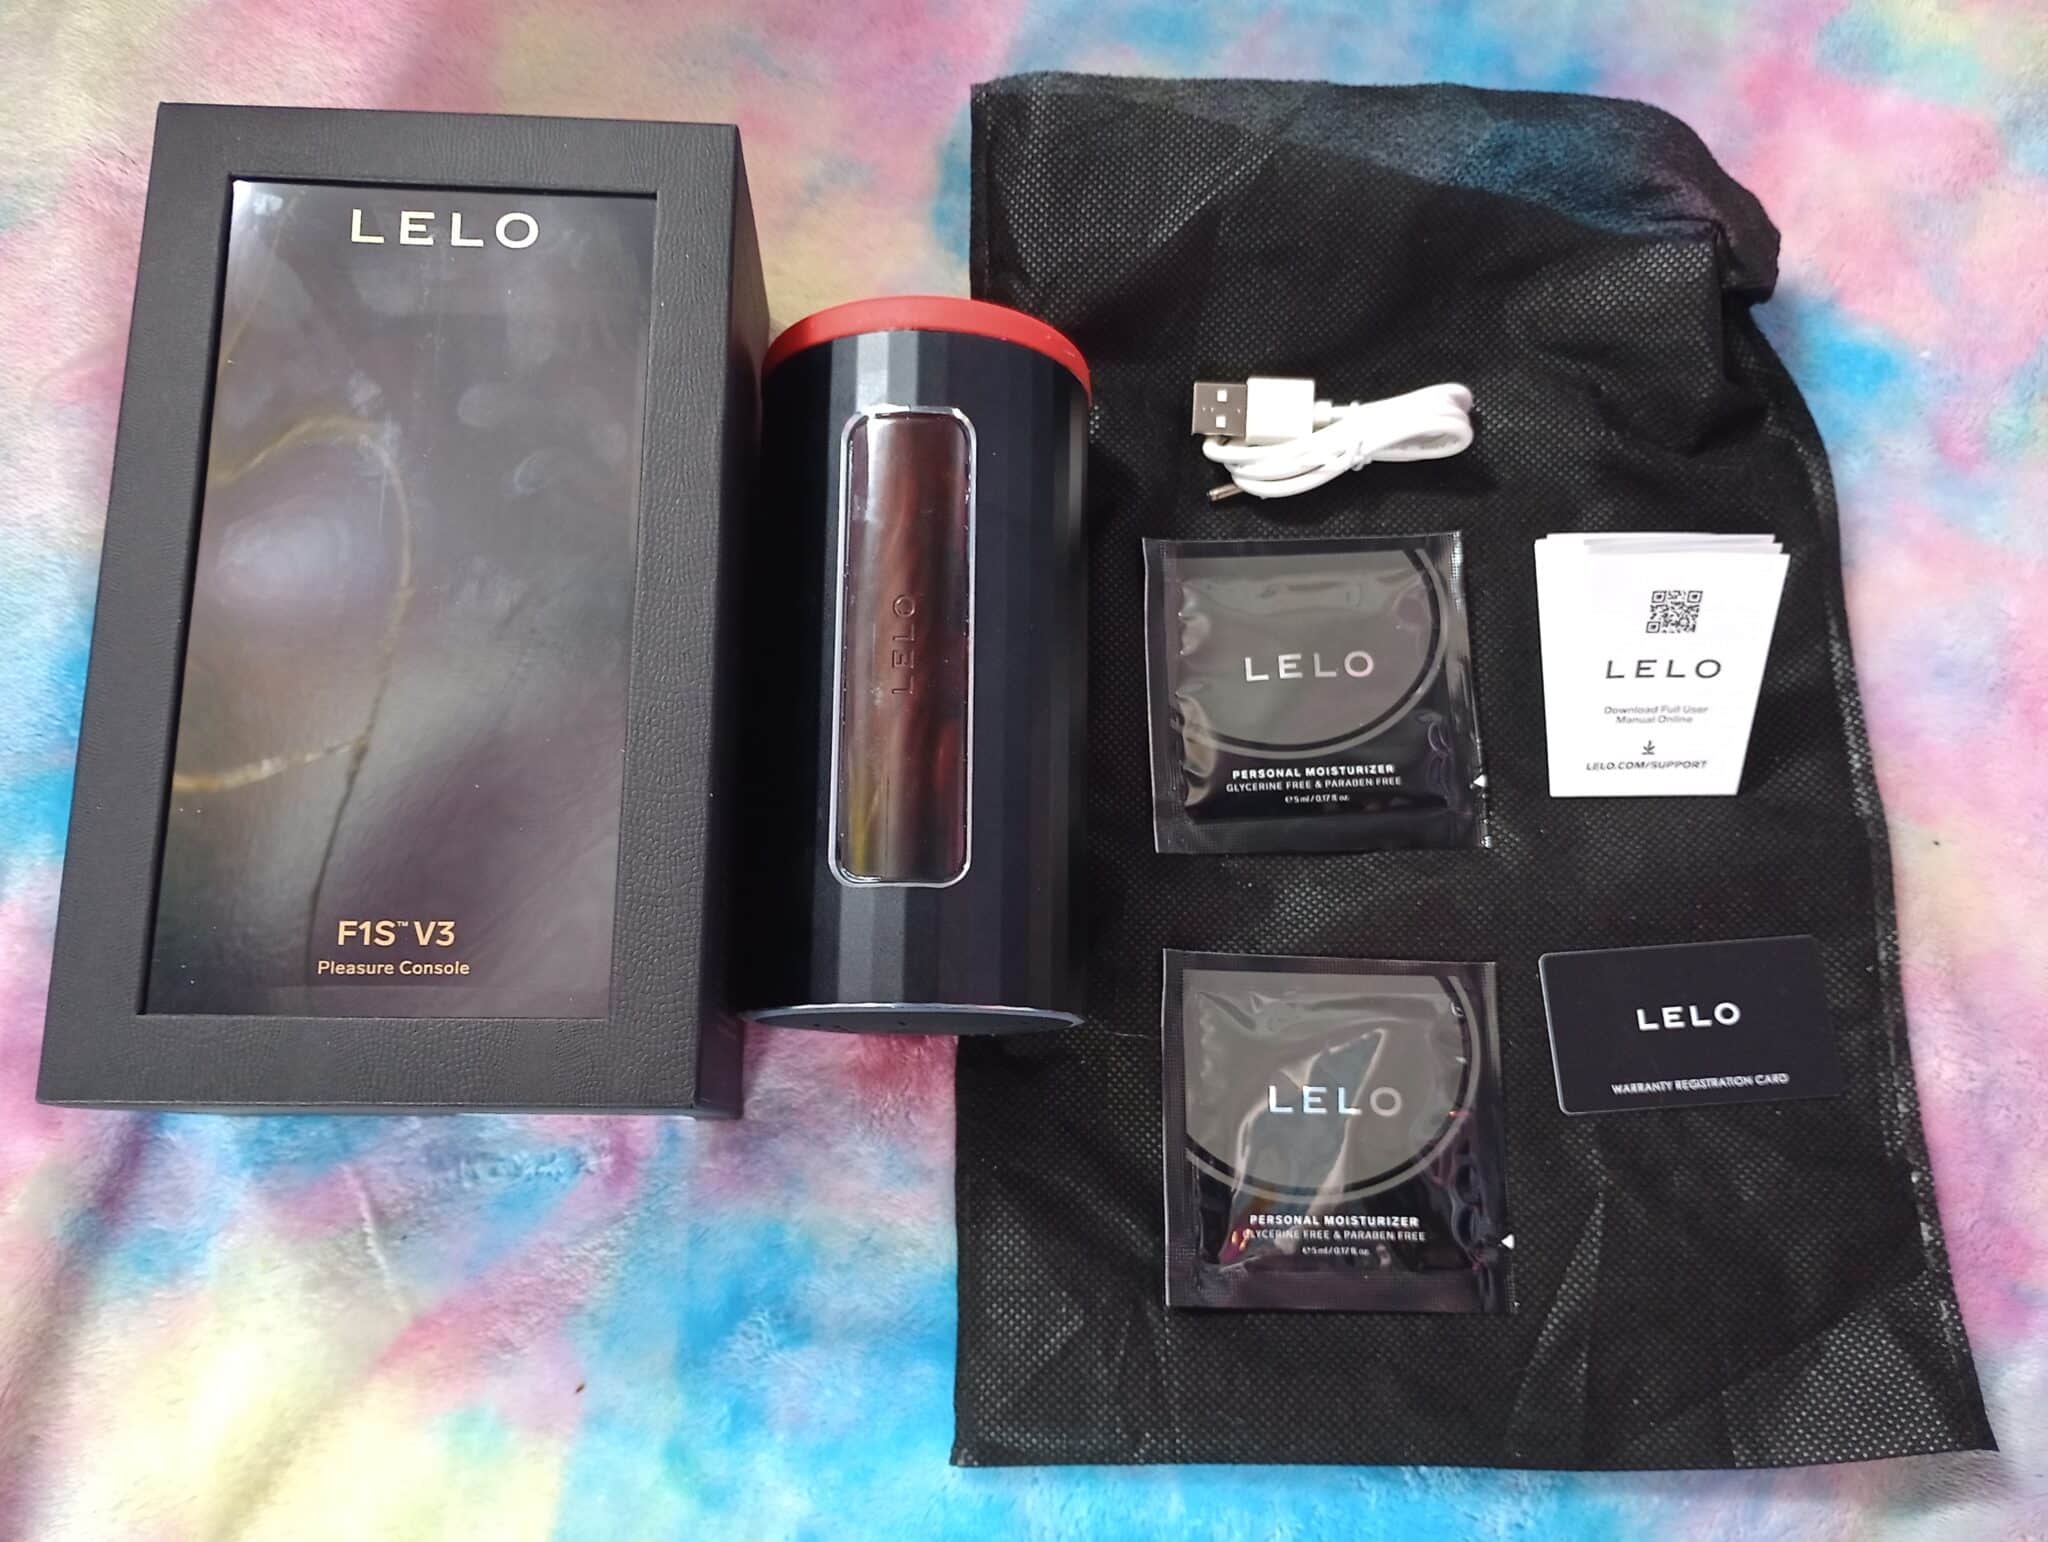 LELO F1S V3 Is the price worth it?